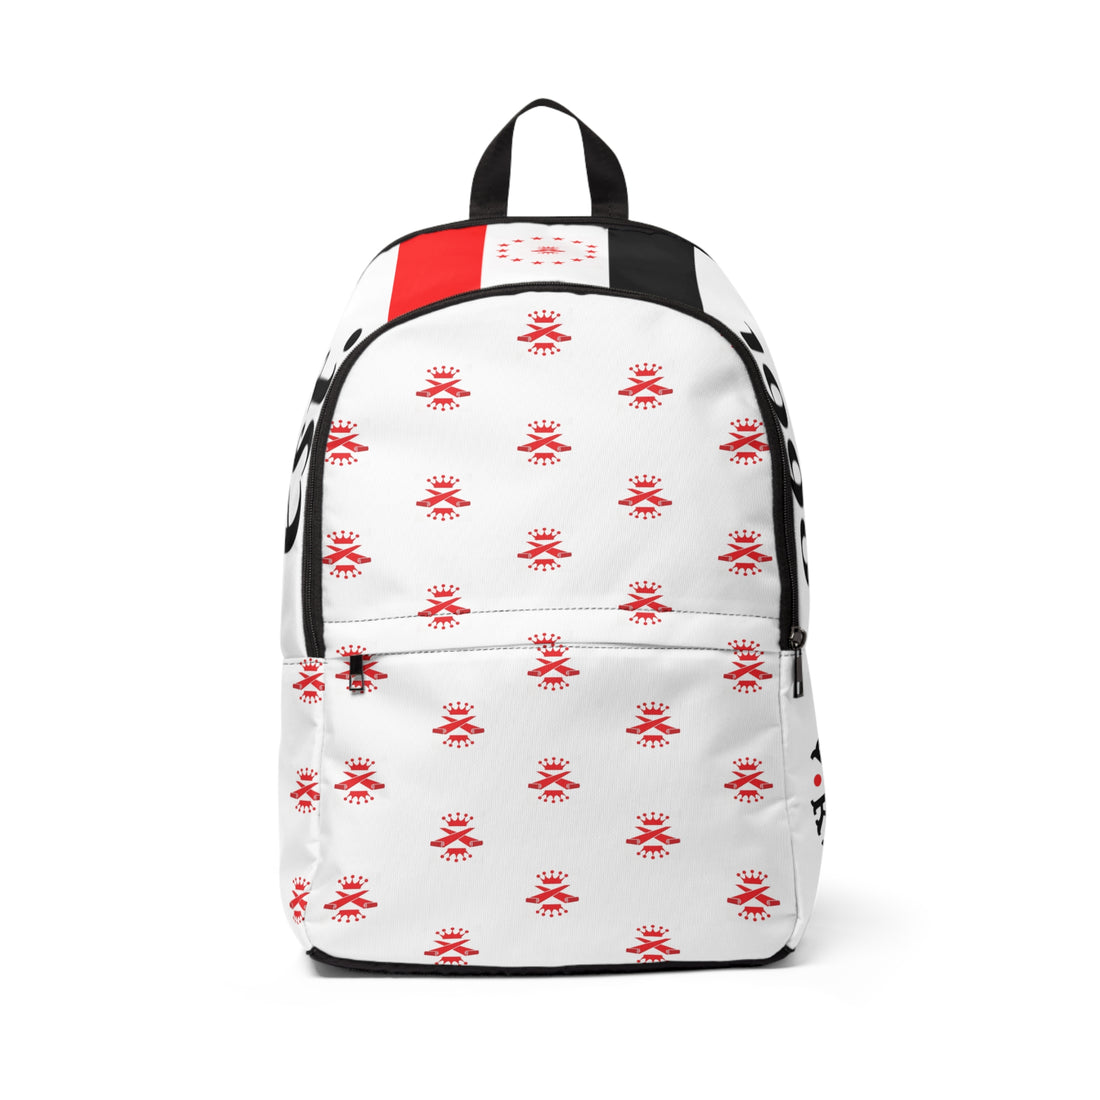 Red Karpet Backpack- On Repeat